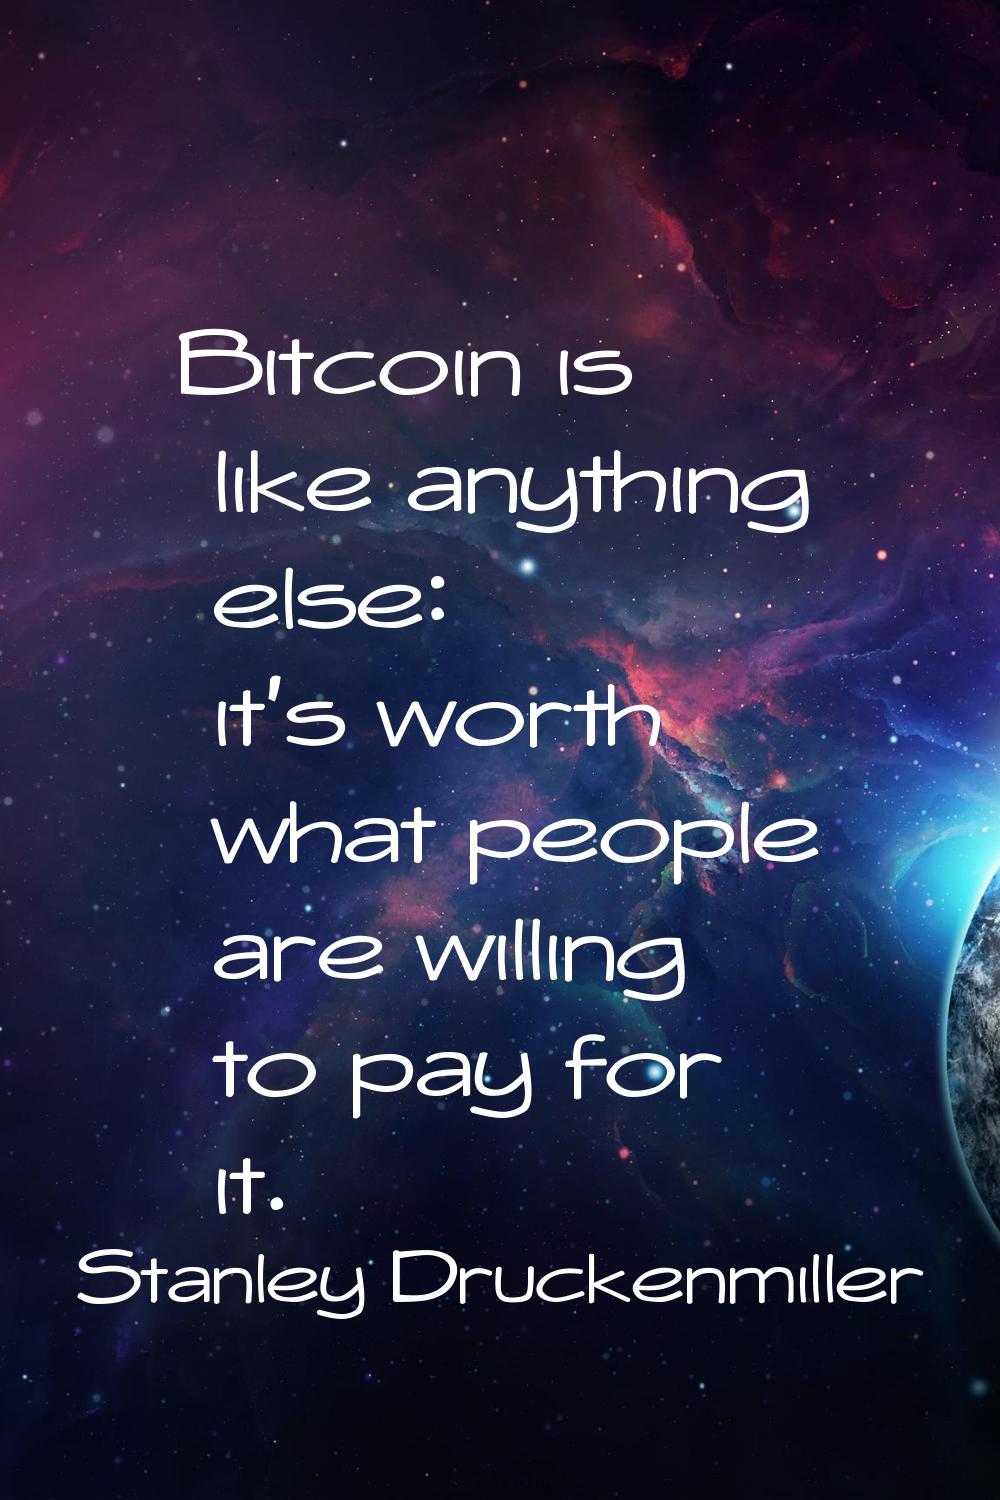 Bitcoin is like anything else: it's worth what people are willing to pay for it.